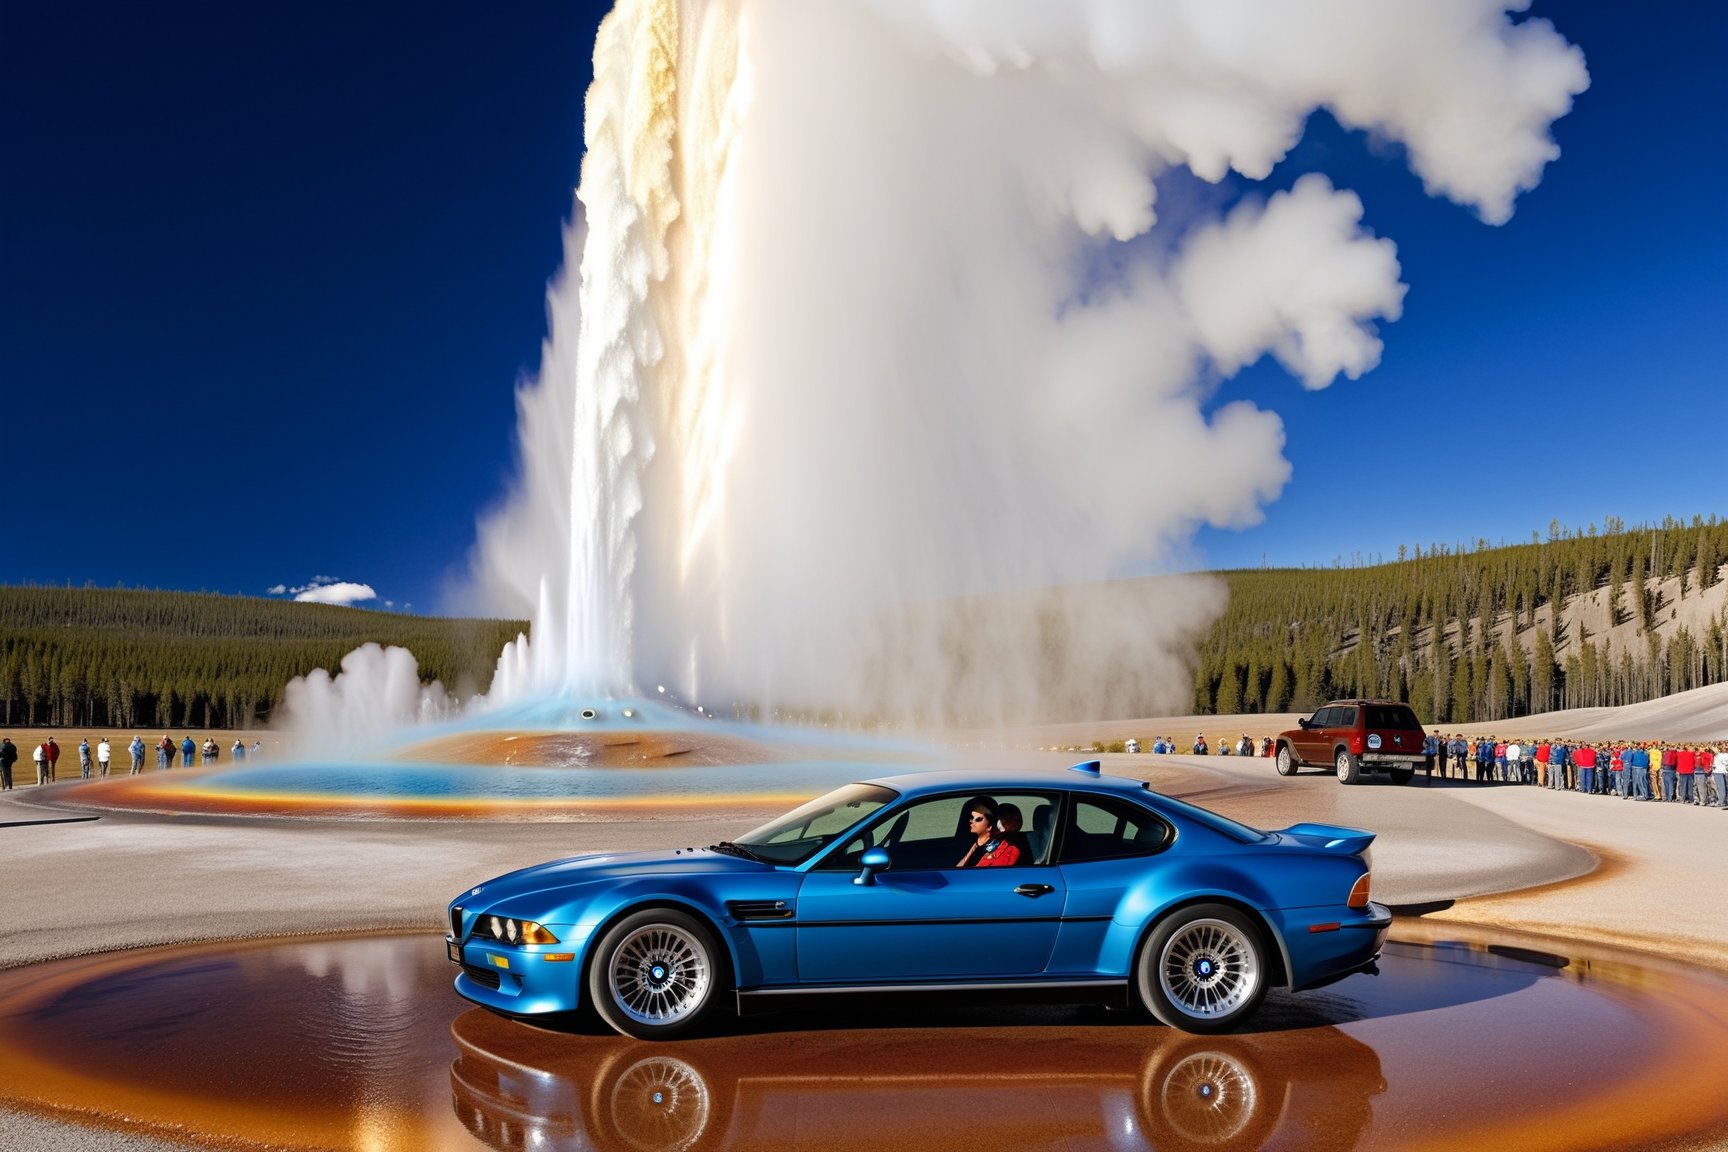 Ultra-realistic photo of racing car \(BMW Gina 2008\) in front of Old Faithful in Yellowstone,(stunning racing car decals:1.5),detailed shiny body with reflection,(body color:Cosmic Carbon Gray with Blue Glow),shiny spinning wheels,(wheel color: Black Chrome),glossy and luxurious alloy wheel,(bright turned on symmetrical head lights),silhouette in driver's seat,by Marcello Gandini,Giorgetto Giugiaro,Leonardo Fioravanti and Alex Issigonis,(backdrop: Old Faithful in Yellowstone,outdoors,multiple boys,sky, day,tree,scenery,6+boys,realistic,photo background,many people watching smoke eruption,mostly white soil with some brown),(BMW focus:1.5),(BMW at a safe distance from the smoke:1.3)
BREAK
aesthetic,rule of thirds,depth of perspective,perfect composition,studio photo,trending on artstation,cinematic lighting,(Hyper-realistic photography,masterpiece, photorealistic,ultra-detailed,intricate details,16K,sharp focus,high contrast,kodachrome 800,HDR:1.2),photo_b00ster,real_booster,ye11owst0ne,(oldfa1thfu1:1.2),more detail XL